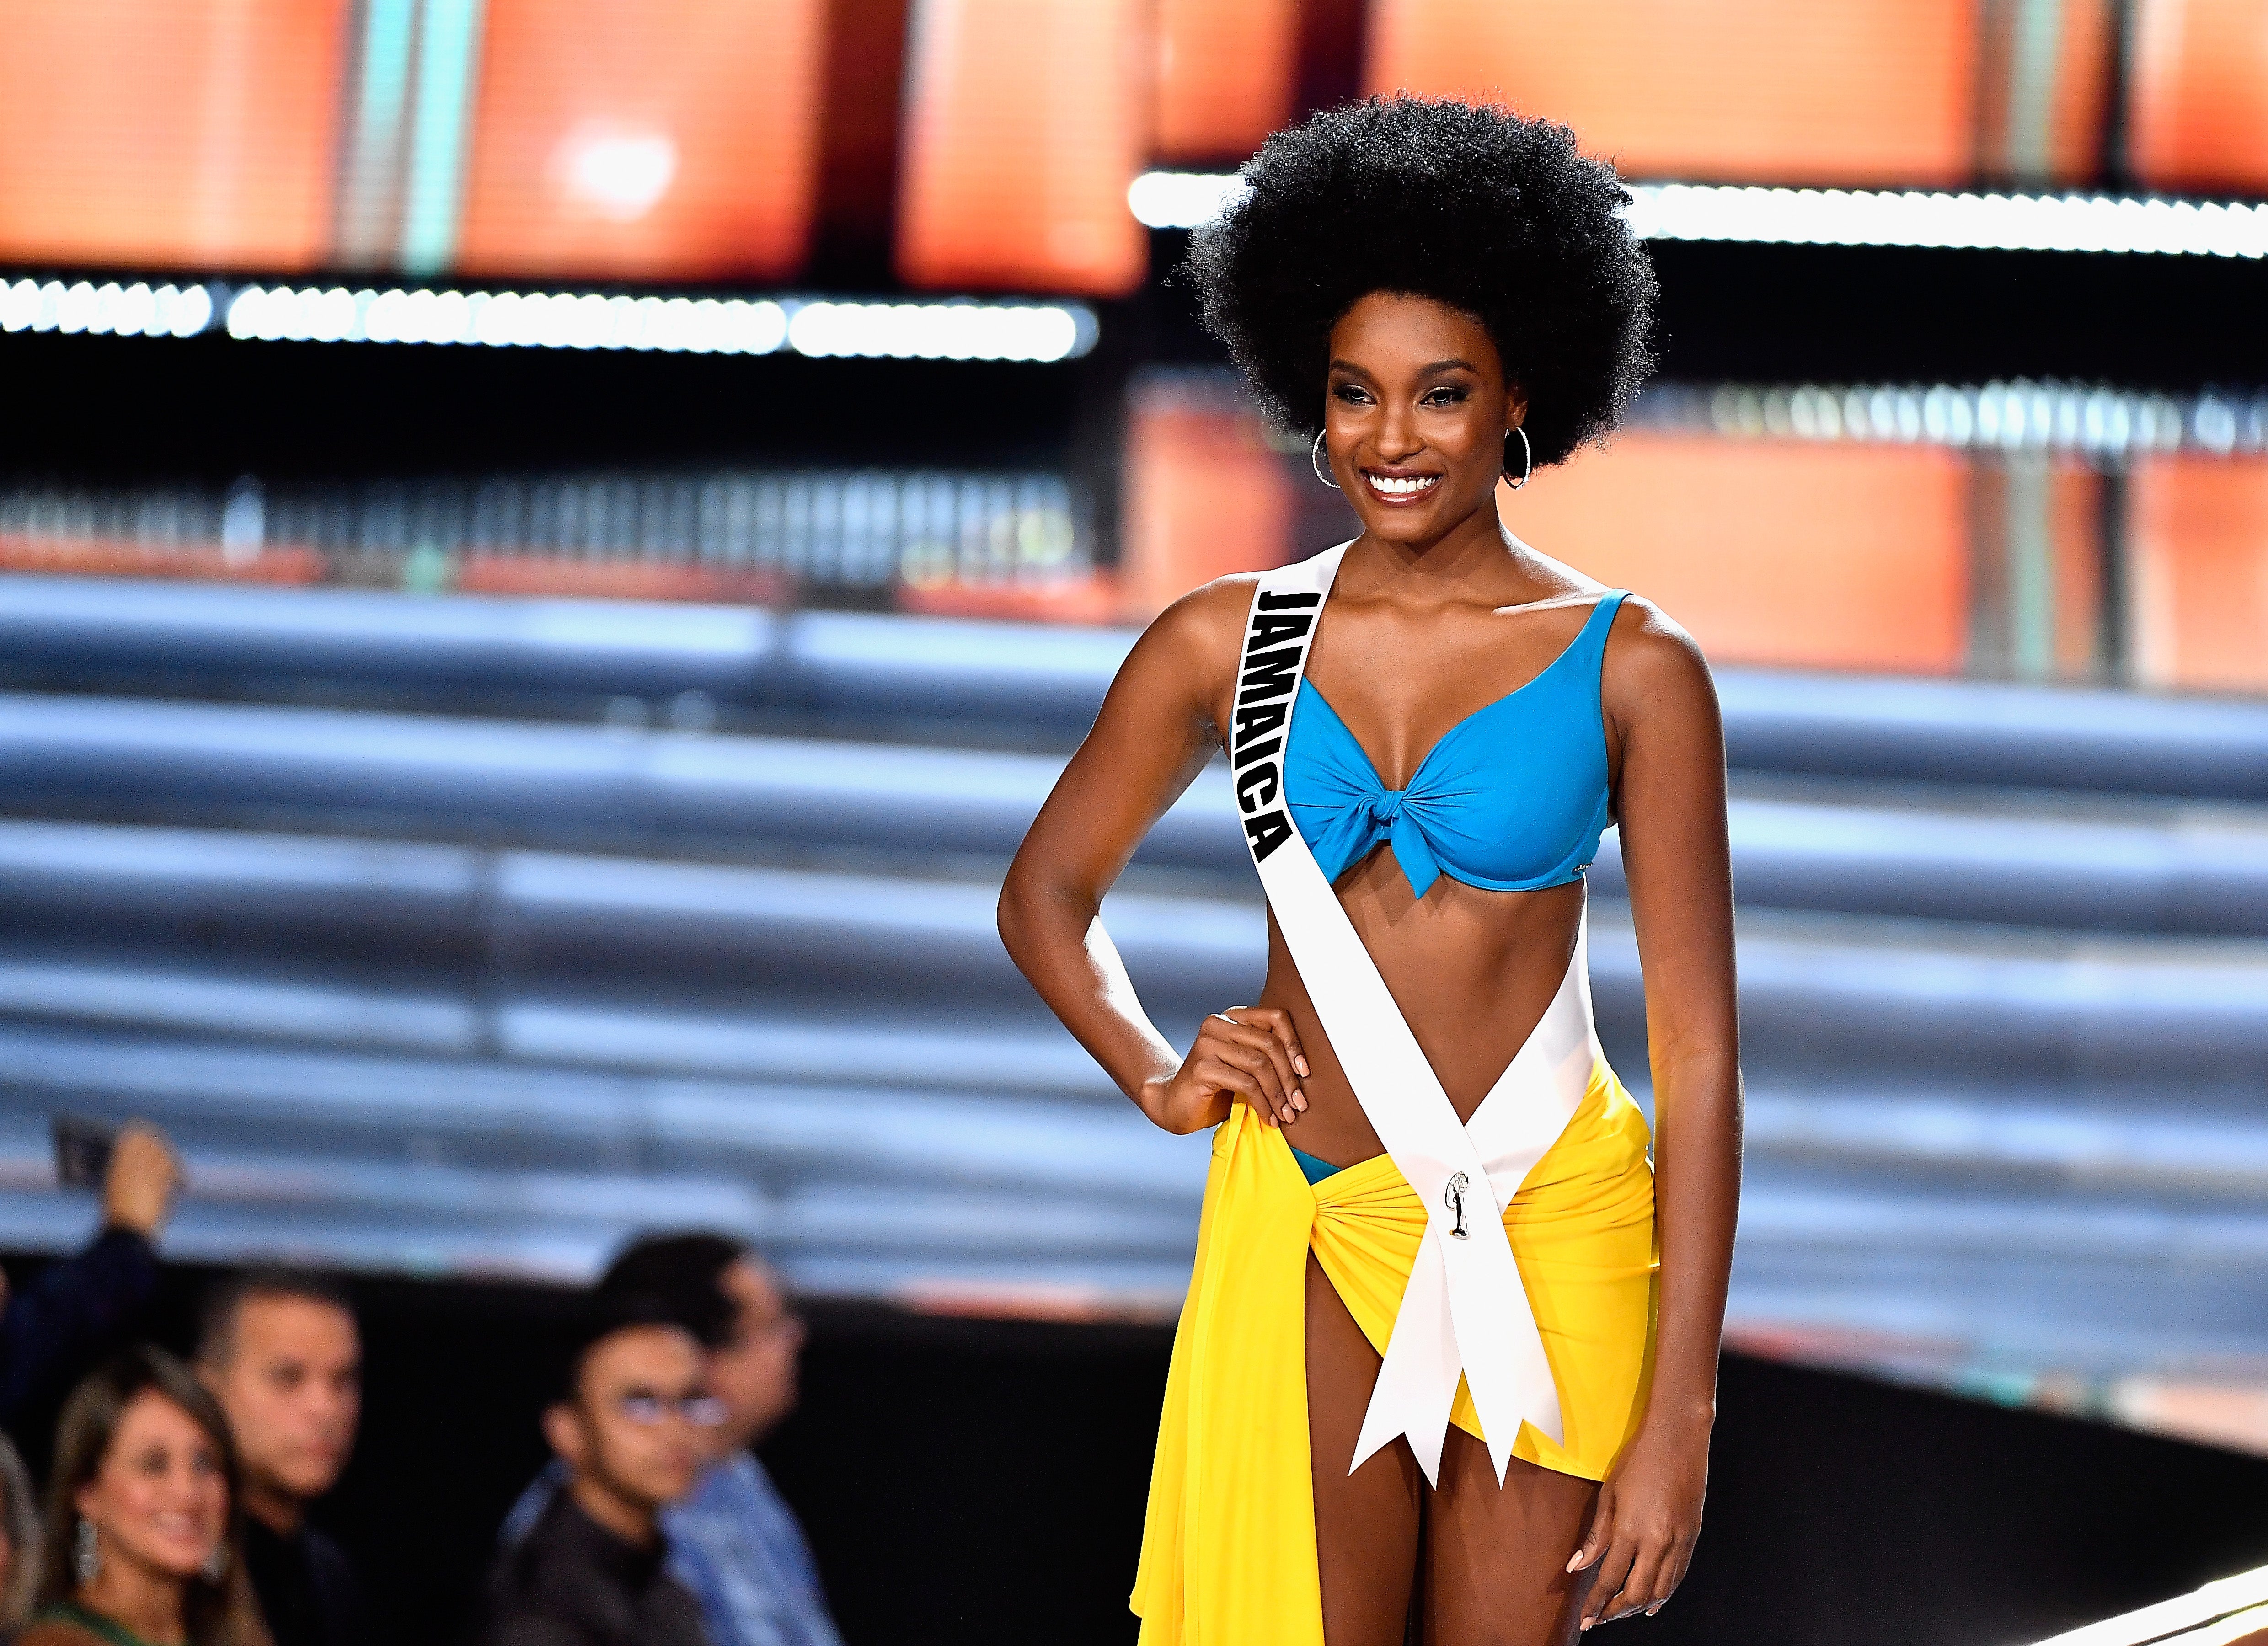 15 Stunning Photos Of Davina Bennett, The Miss Universe Contestant With The Glorious Afro Who’s Breaking The Internet